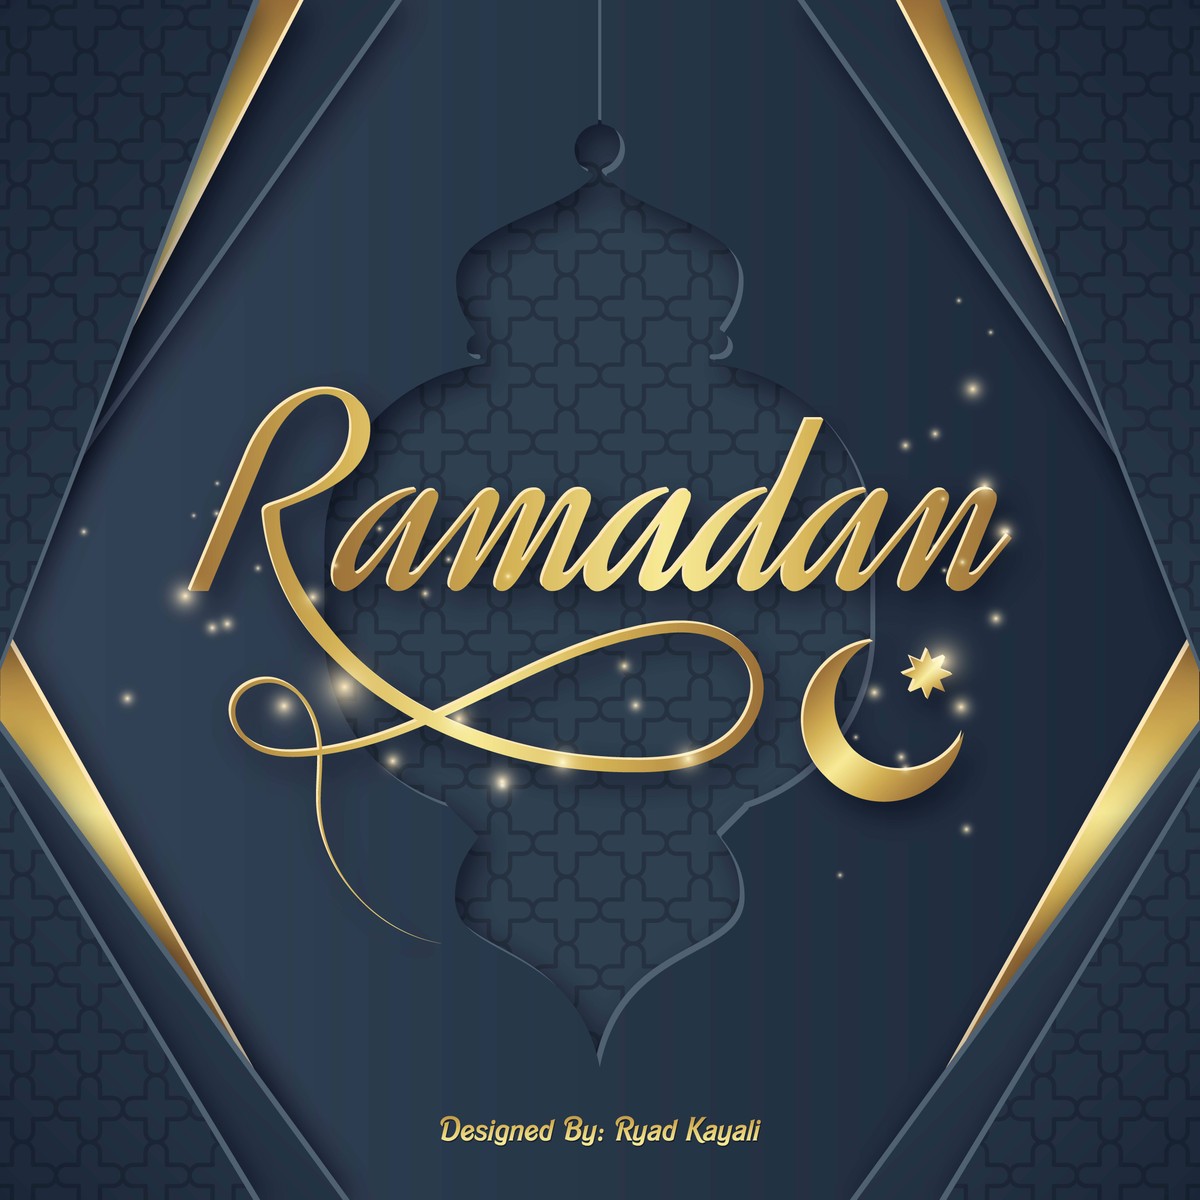 Greeting cards on the occasion of Ramadan